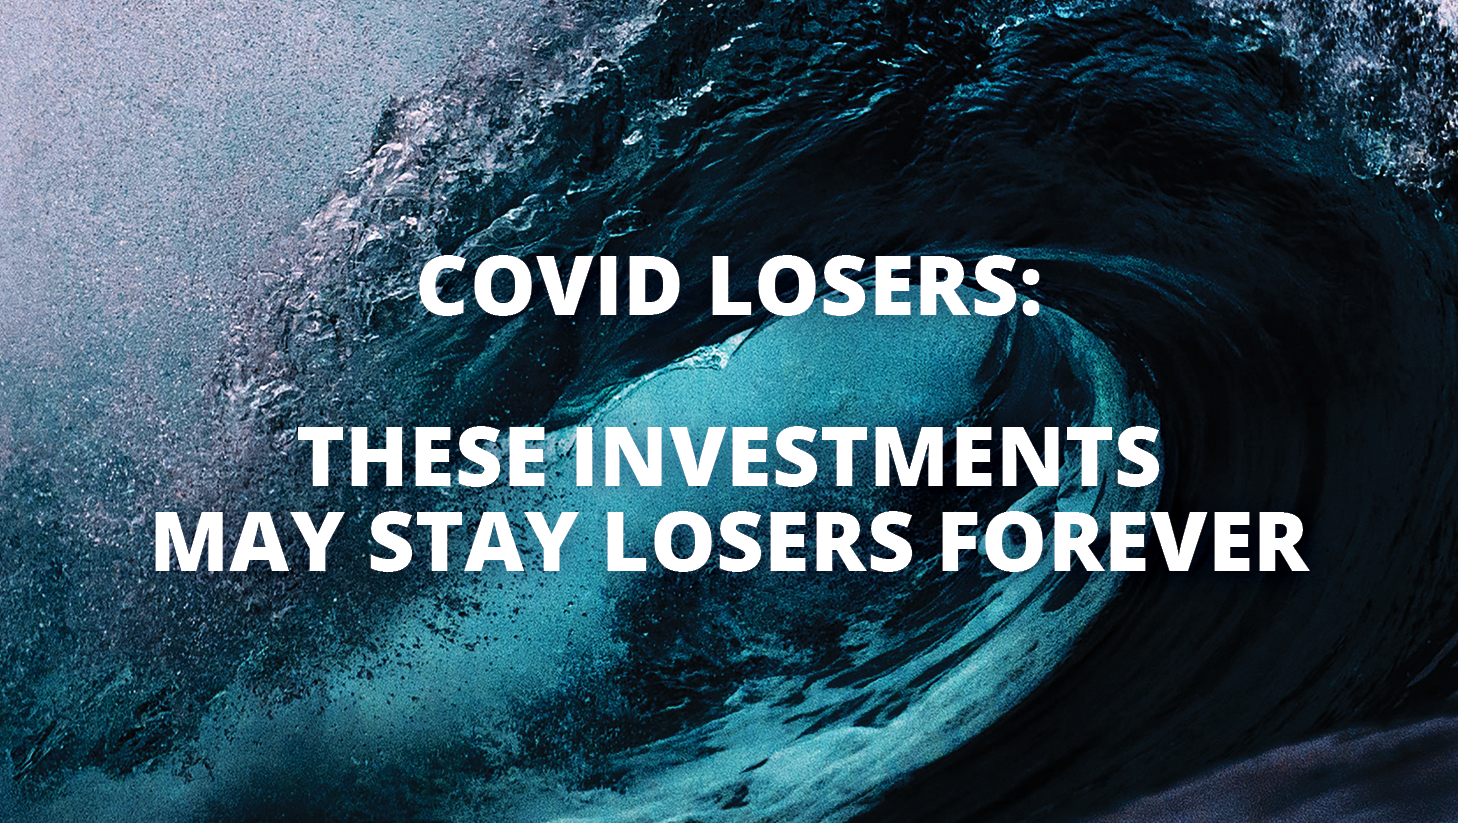 COVID losers- These investments may stay losers forever